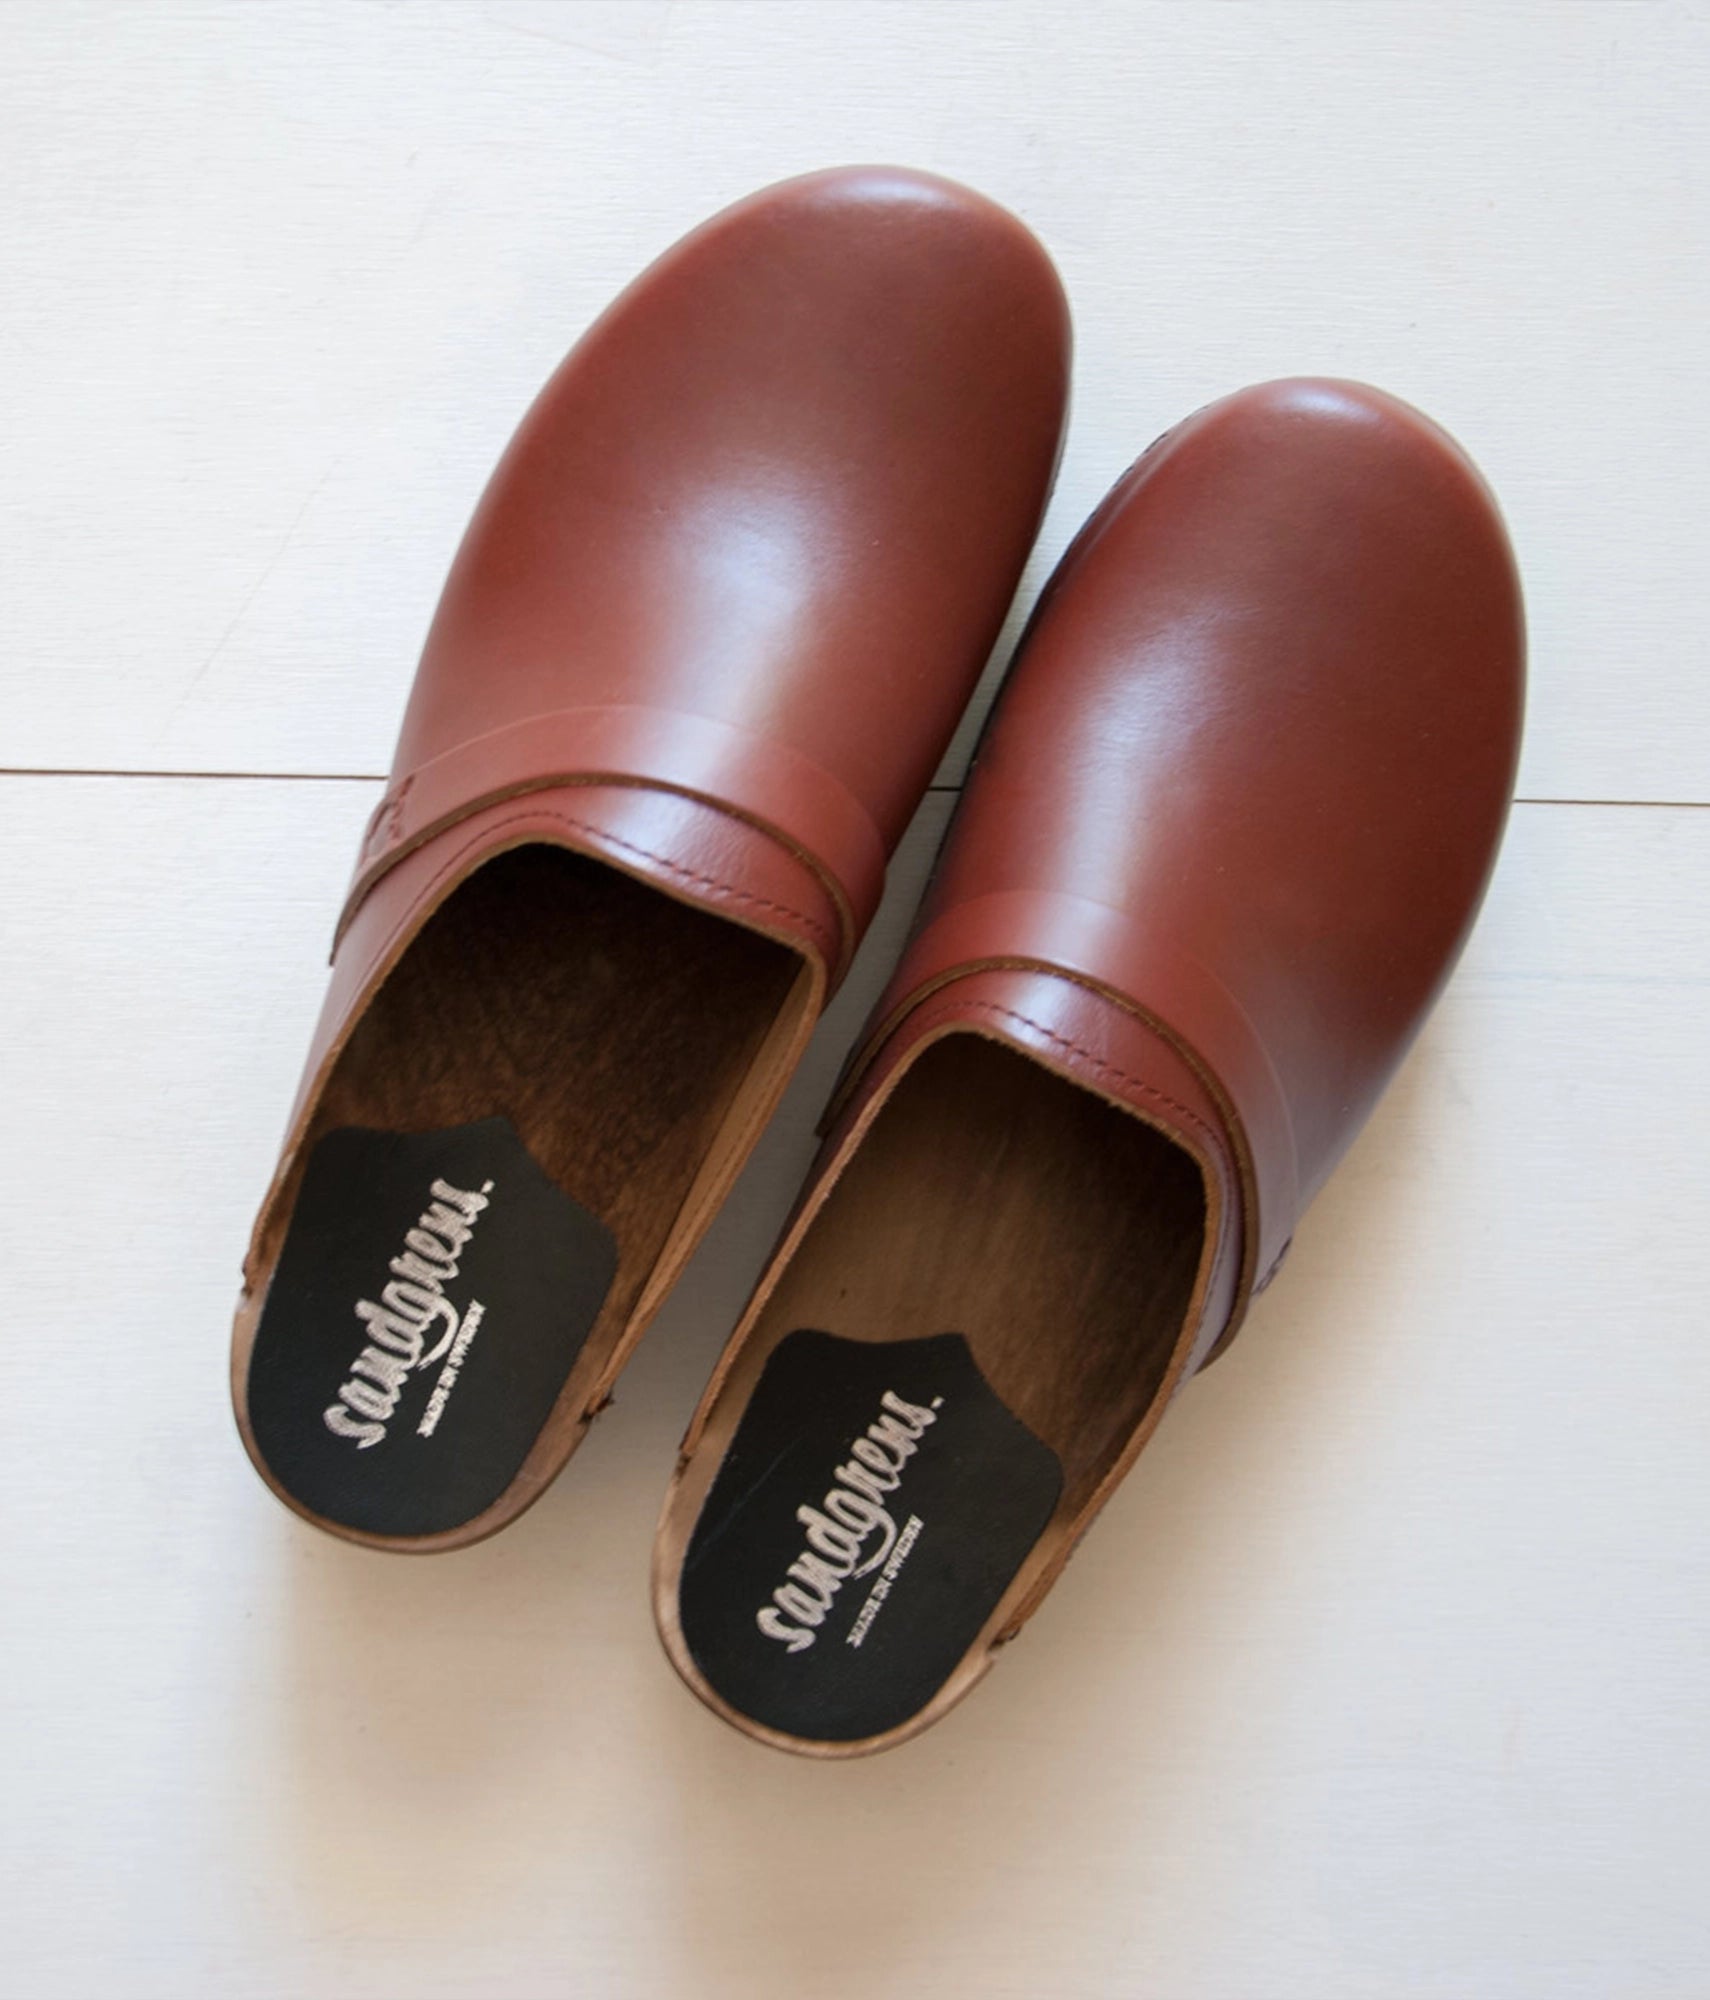 low heeled classic clog mules in cognac red vegetable tanned leather stapled on a dark wooden base